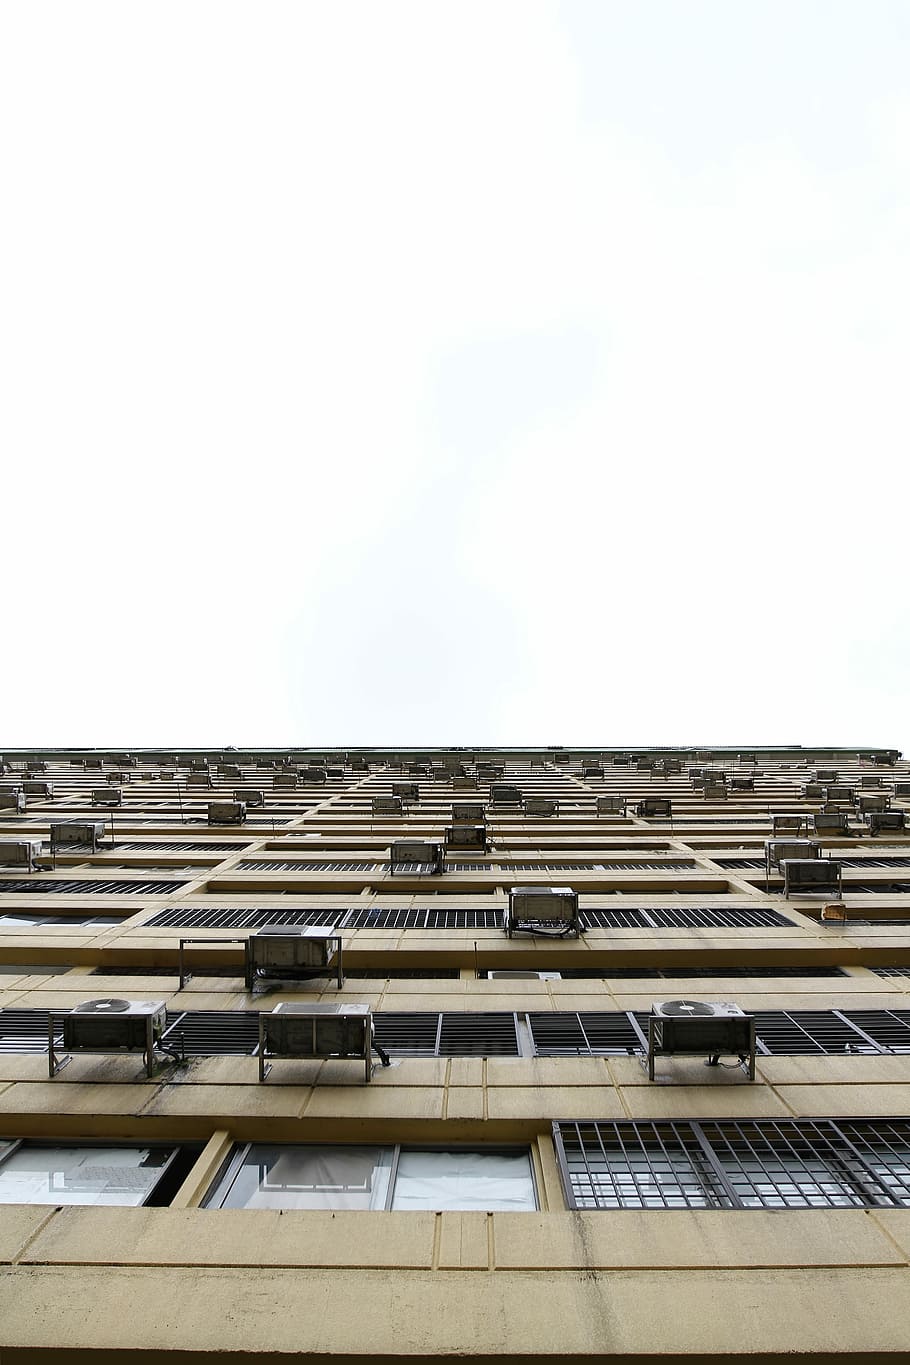 beige building in worm's eye view photography, worm view photography of brown high-rise building